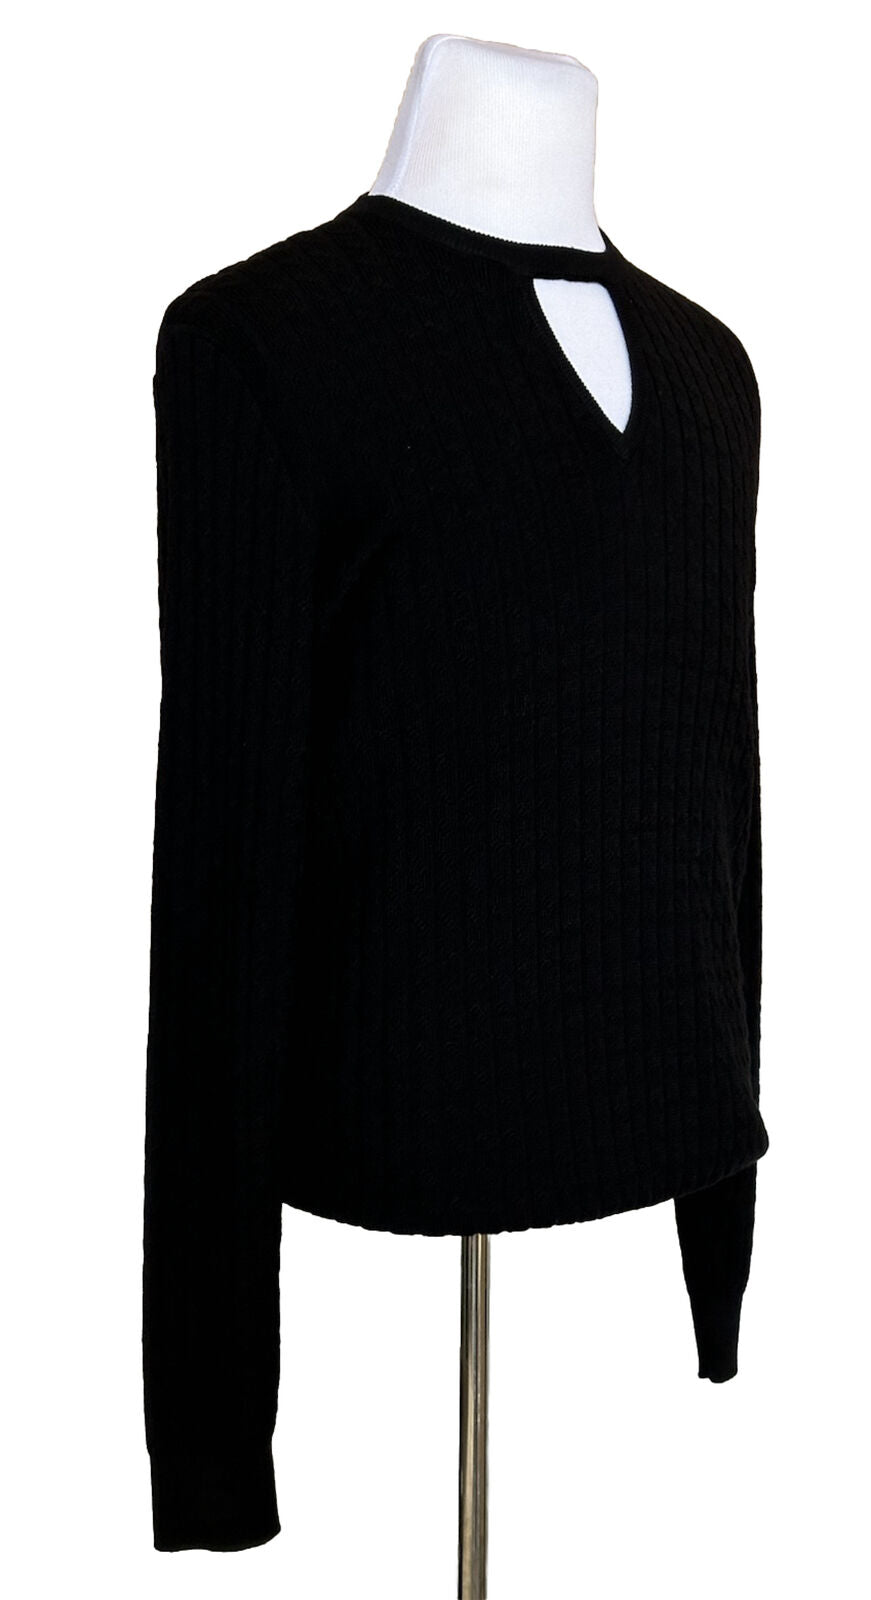 NWT $1250 Fendi Wool Knit Pullover Sweater Black 54 Euro FZX077 Made in Italy